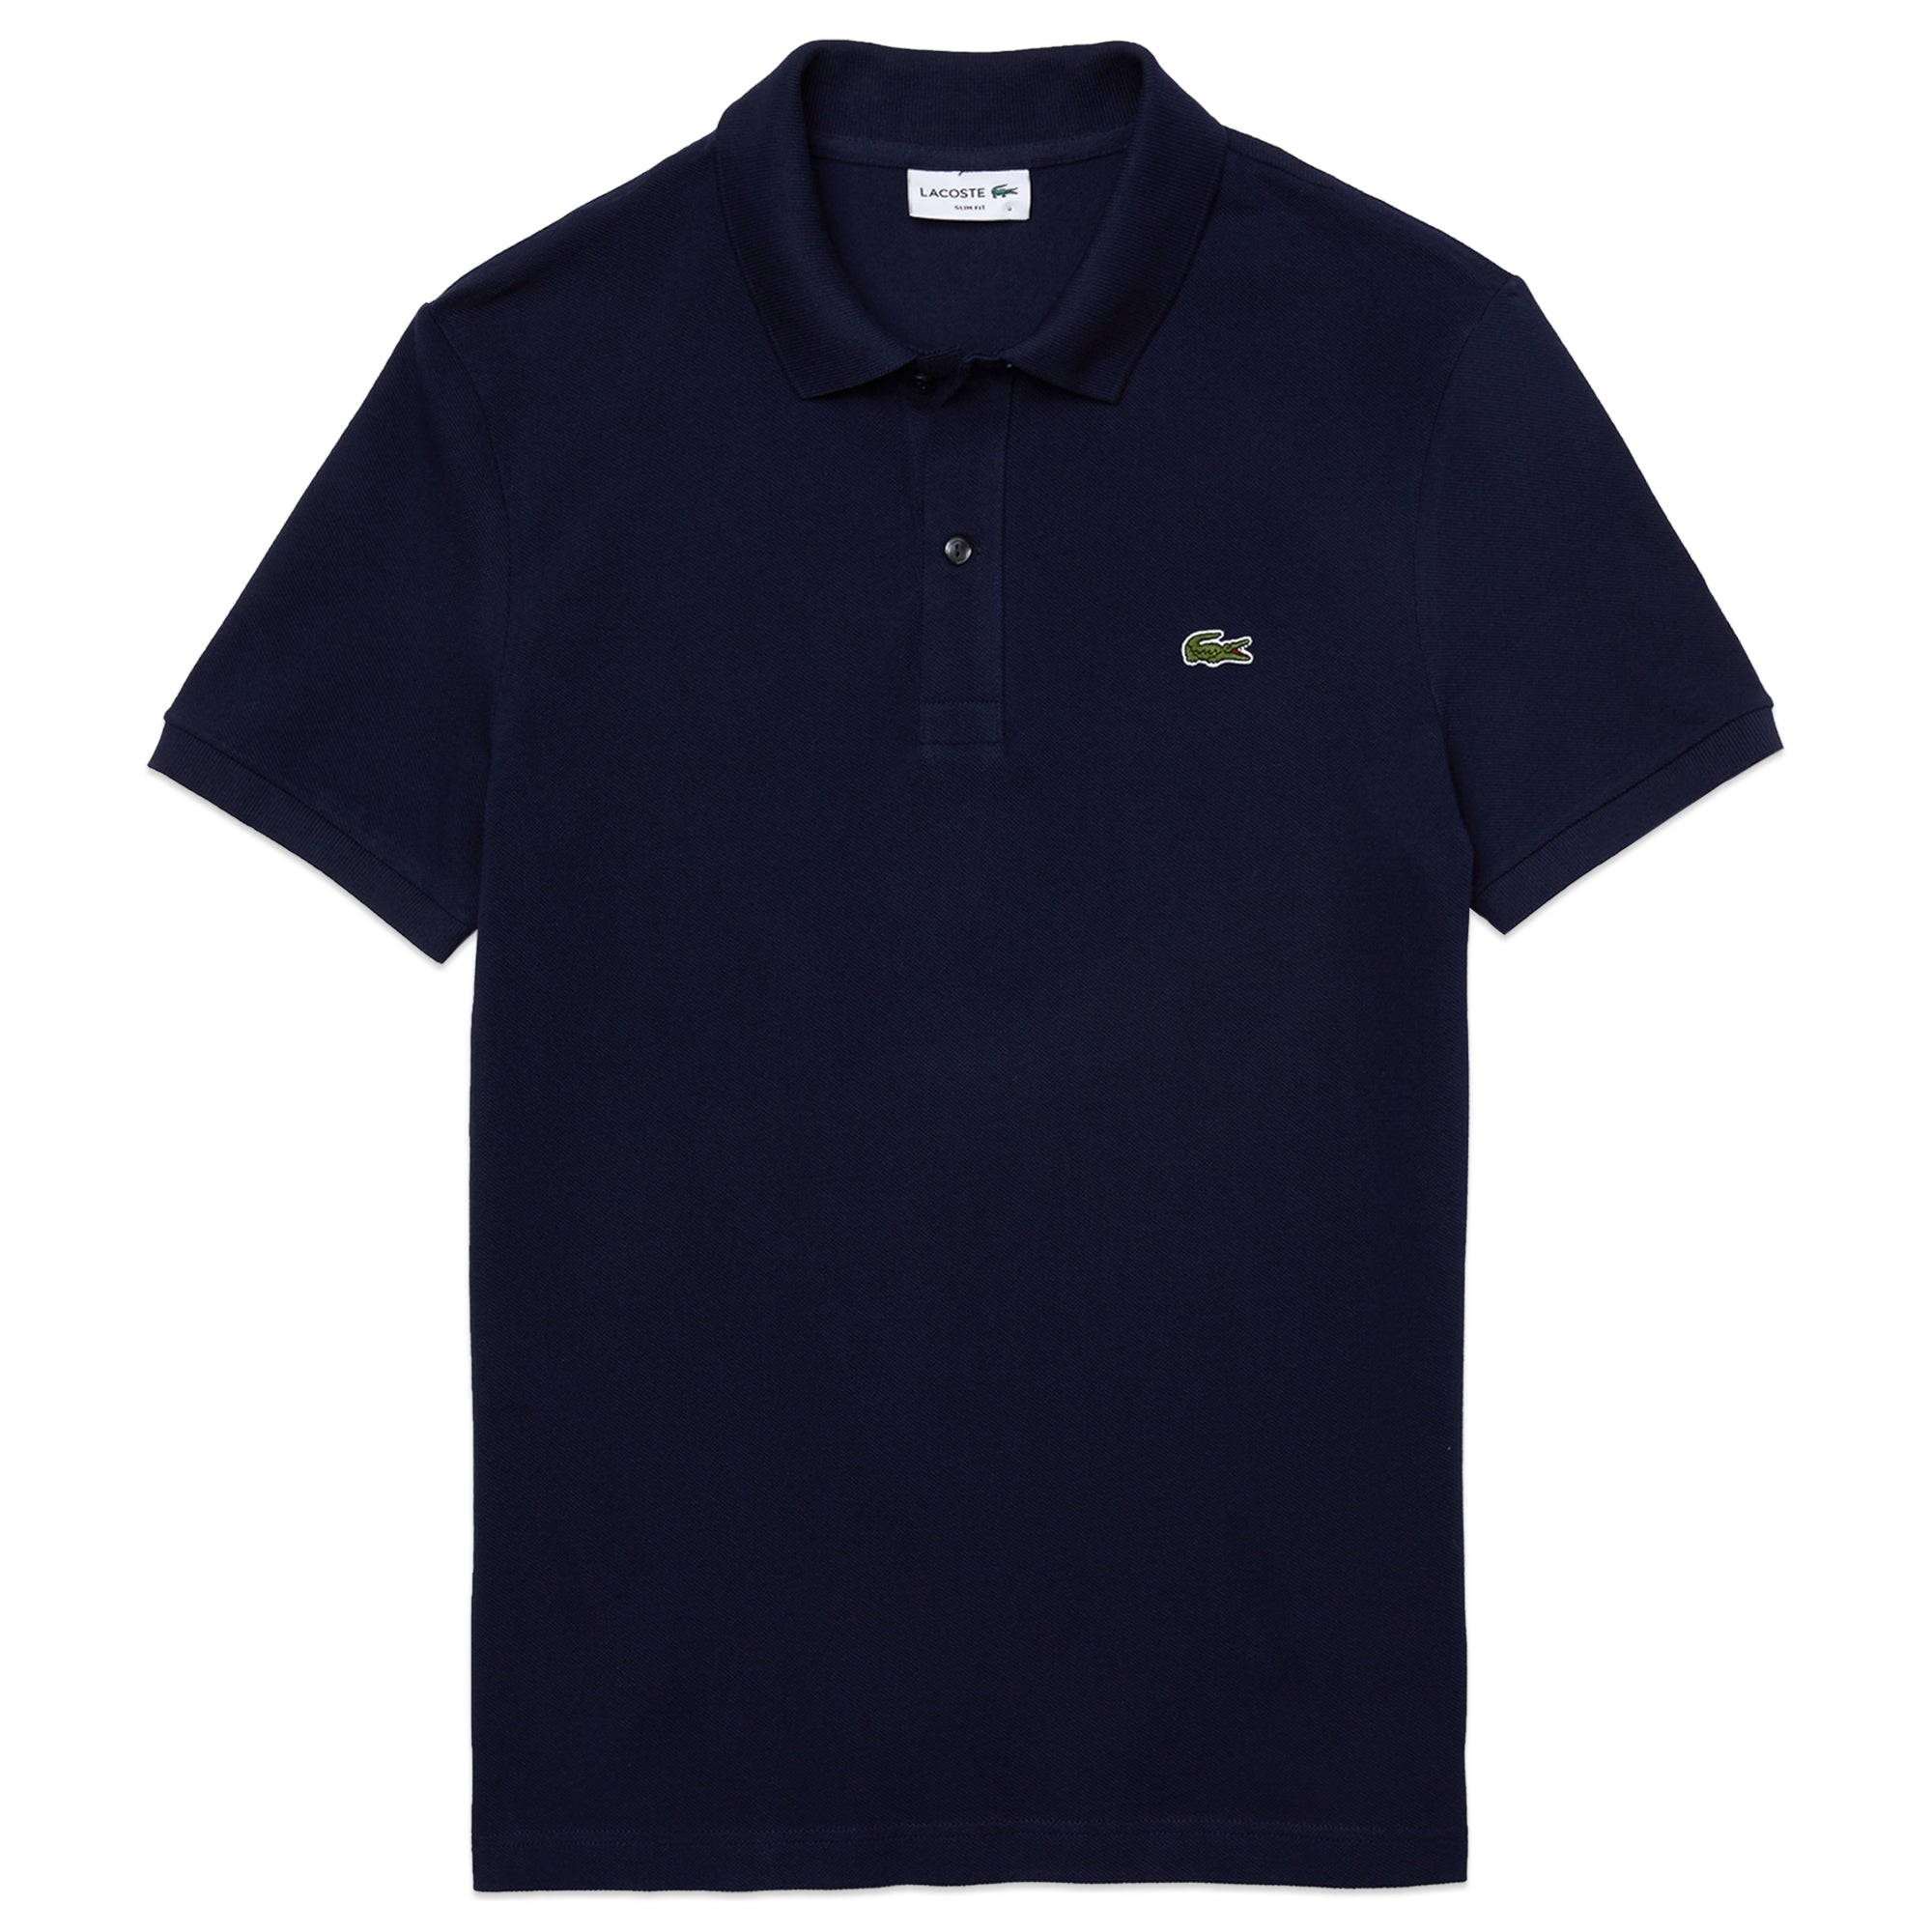 Lacoste Short Sleeved Blue Slim Fit PH4012 - Argentina Polo